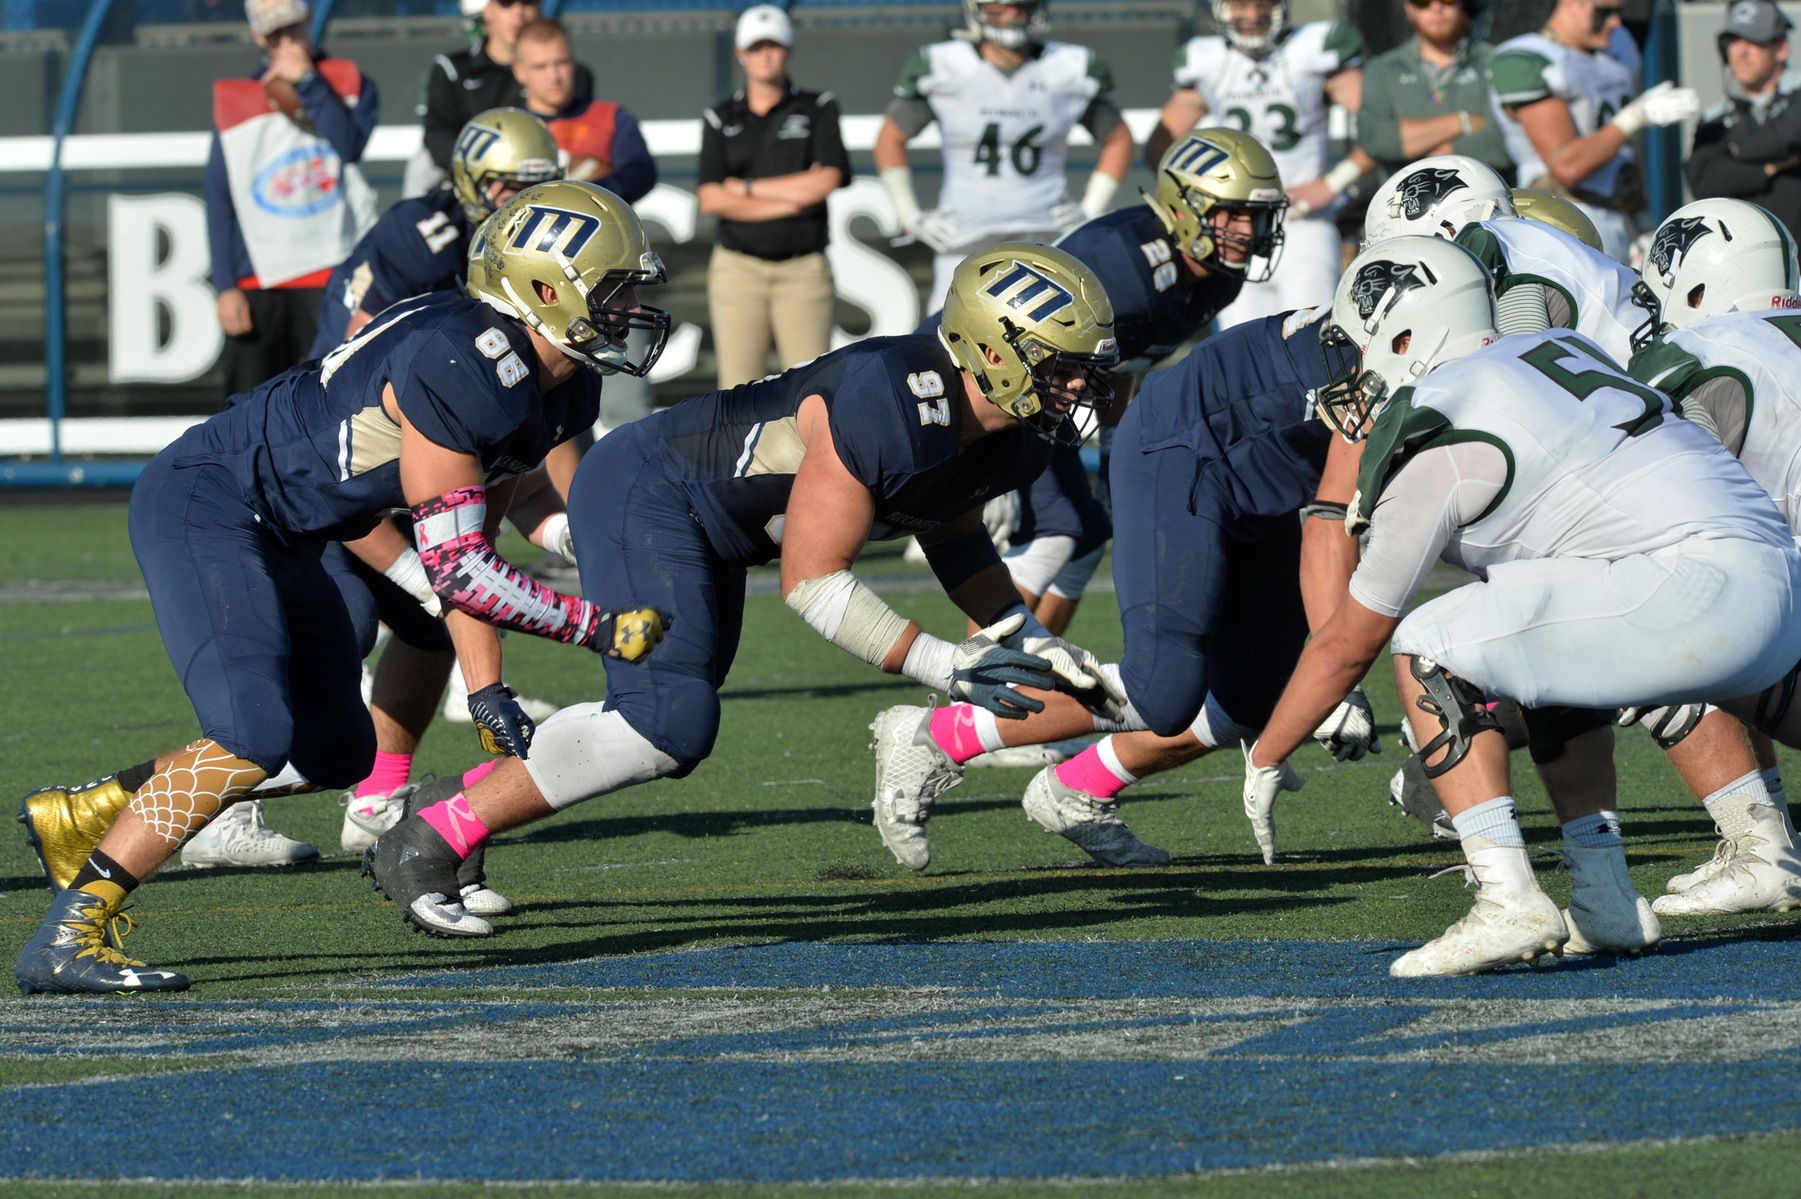 Buc Defense Strong in Loss to Colonials